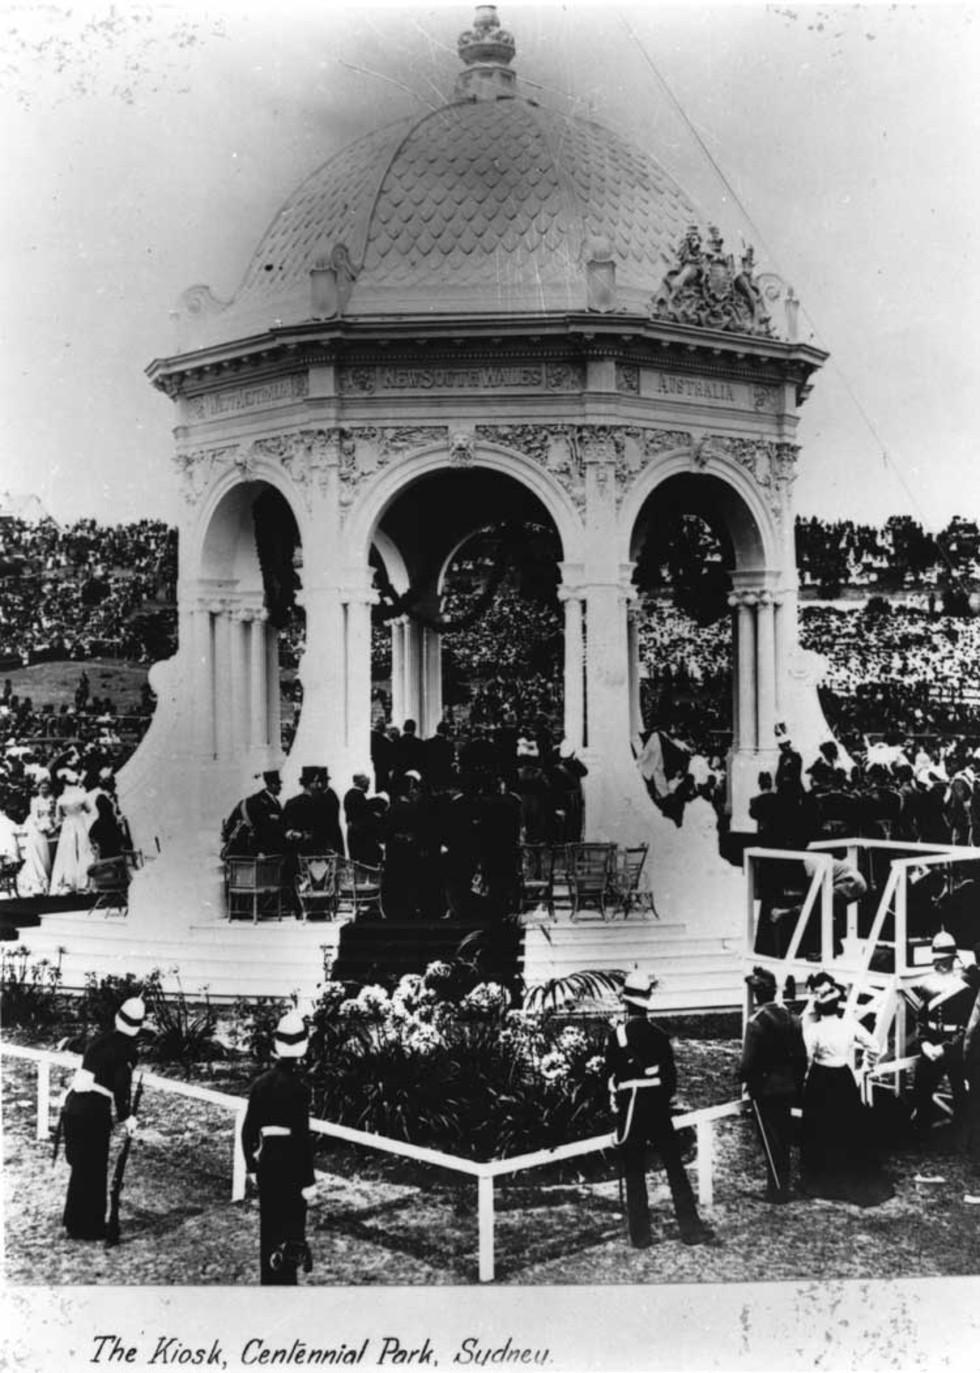 Federation Kiosk in Centennial Park during Inauguration Day celebrations.